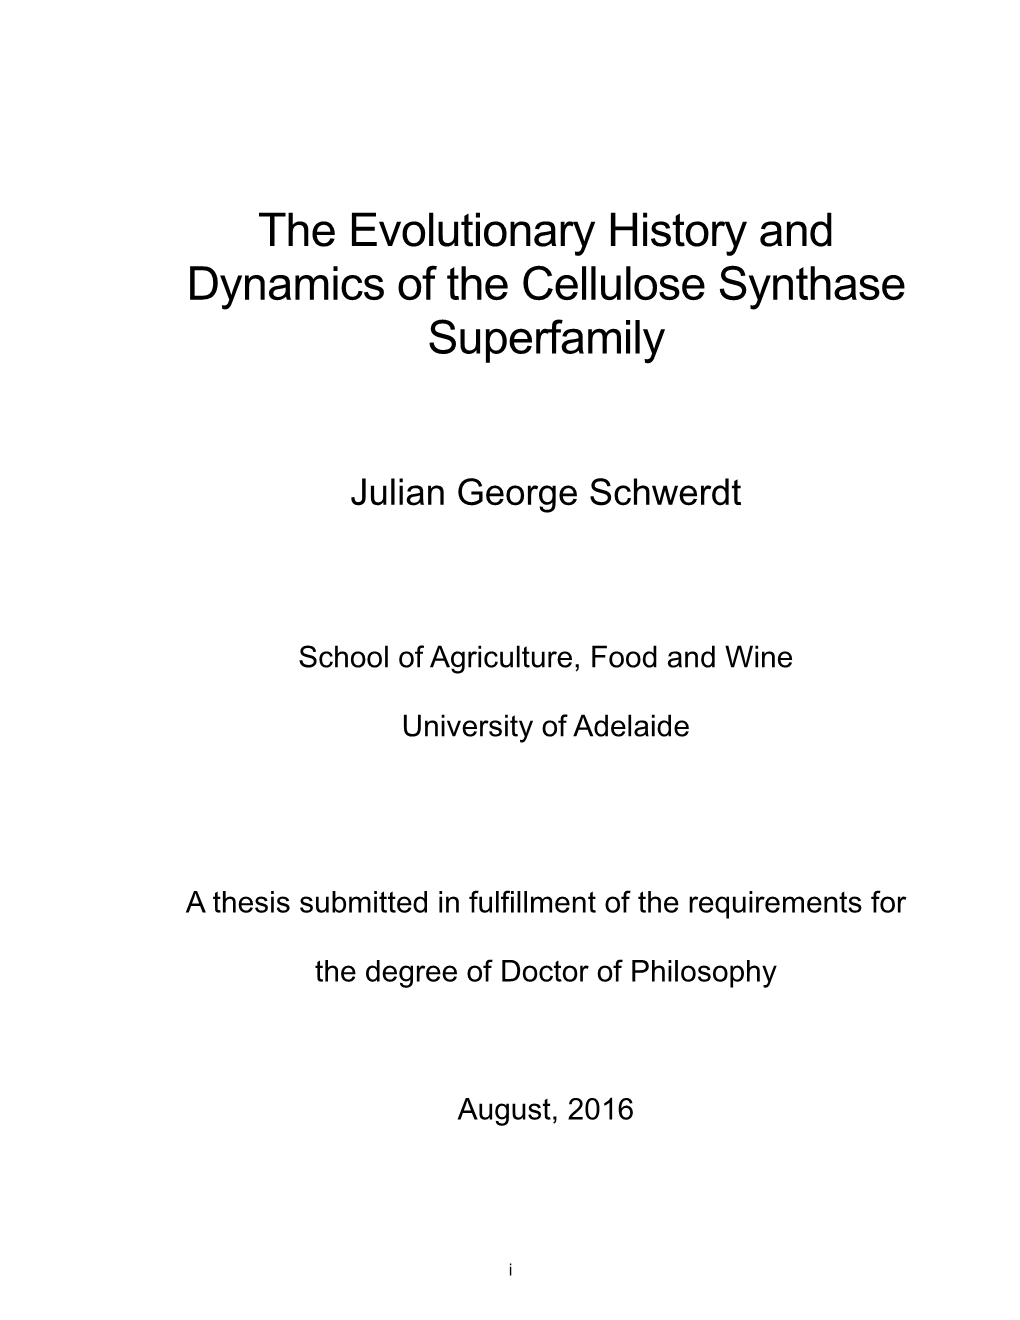 The Evolutionary History and Dynamics of the Cellulose Synthase Superfamily